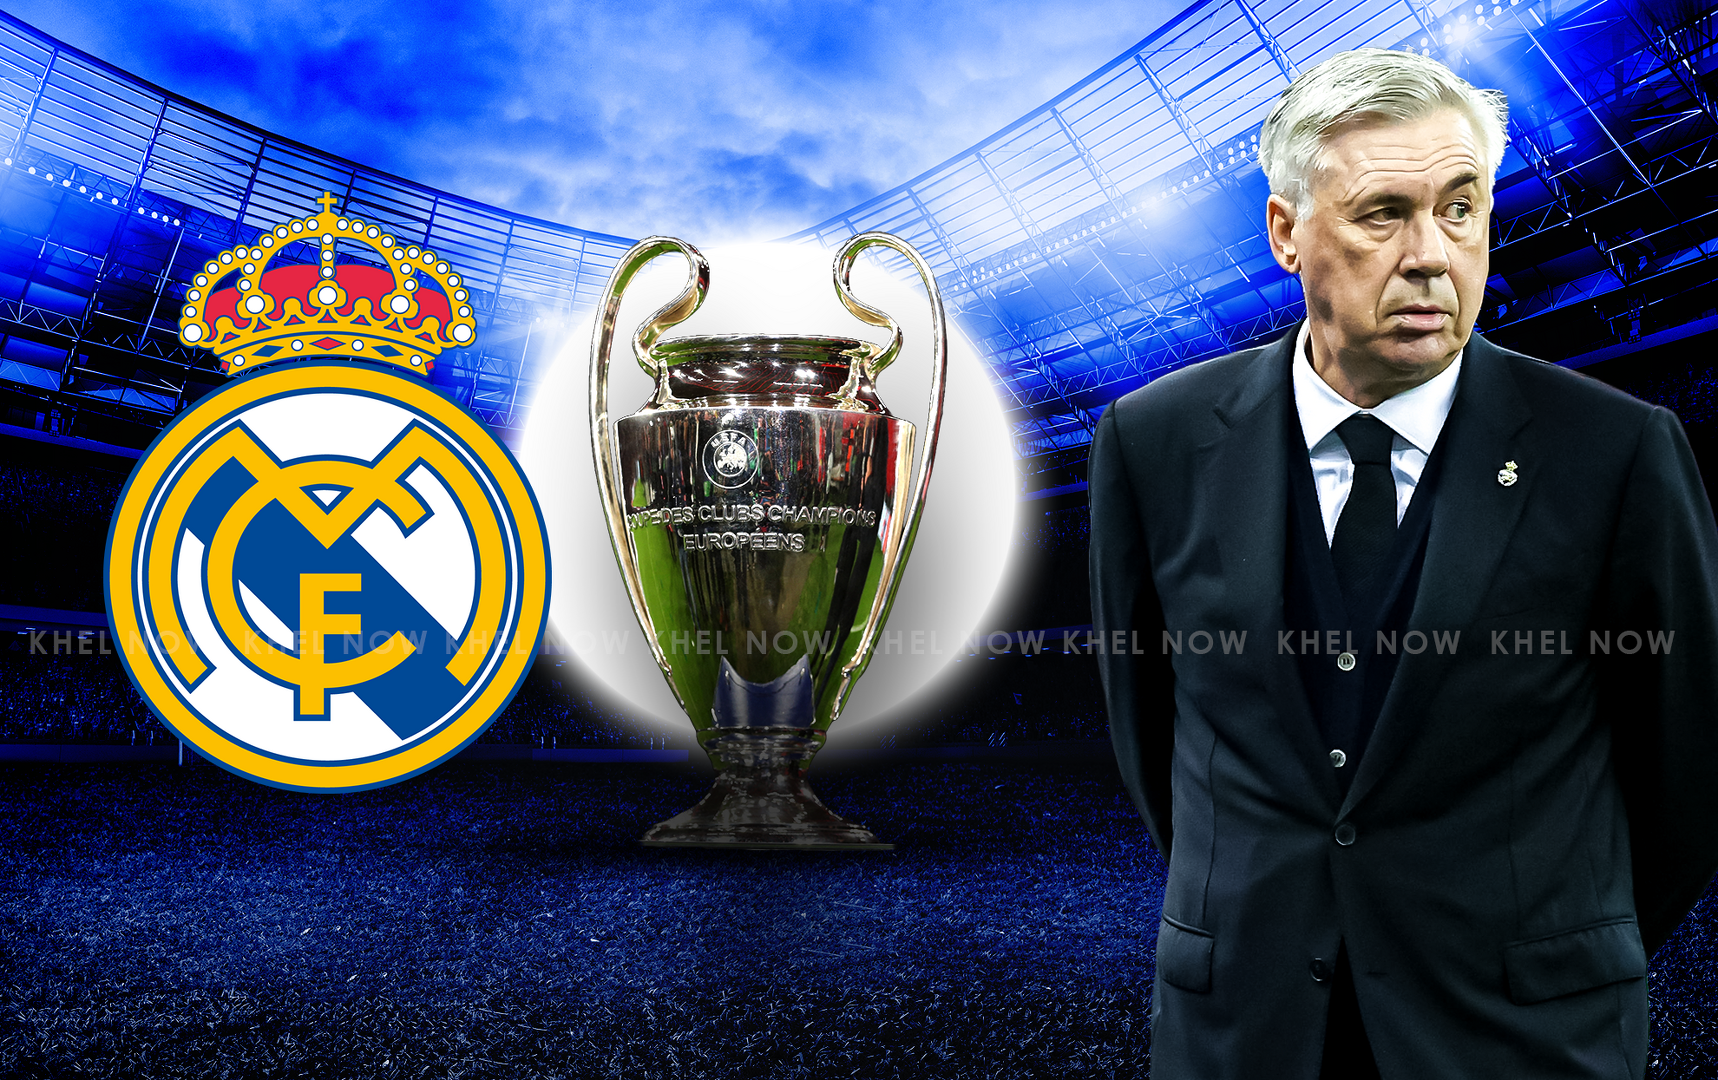 Real Madrid only team to have won more Champions League titles than Carlo Ancelotti